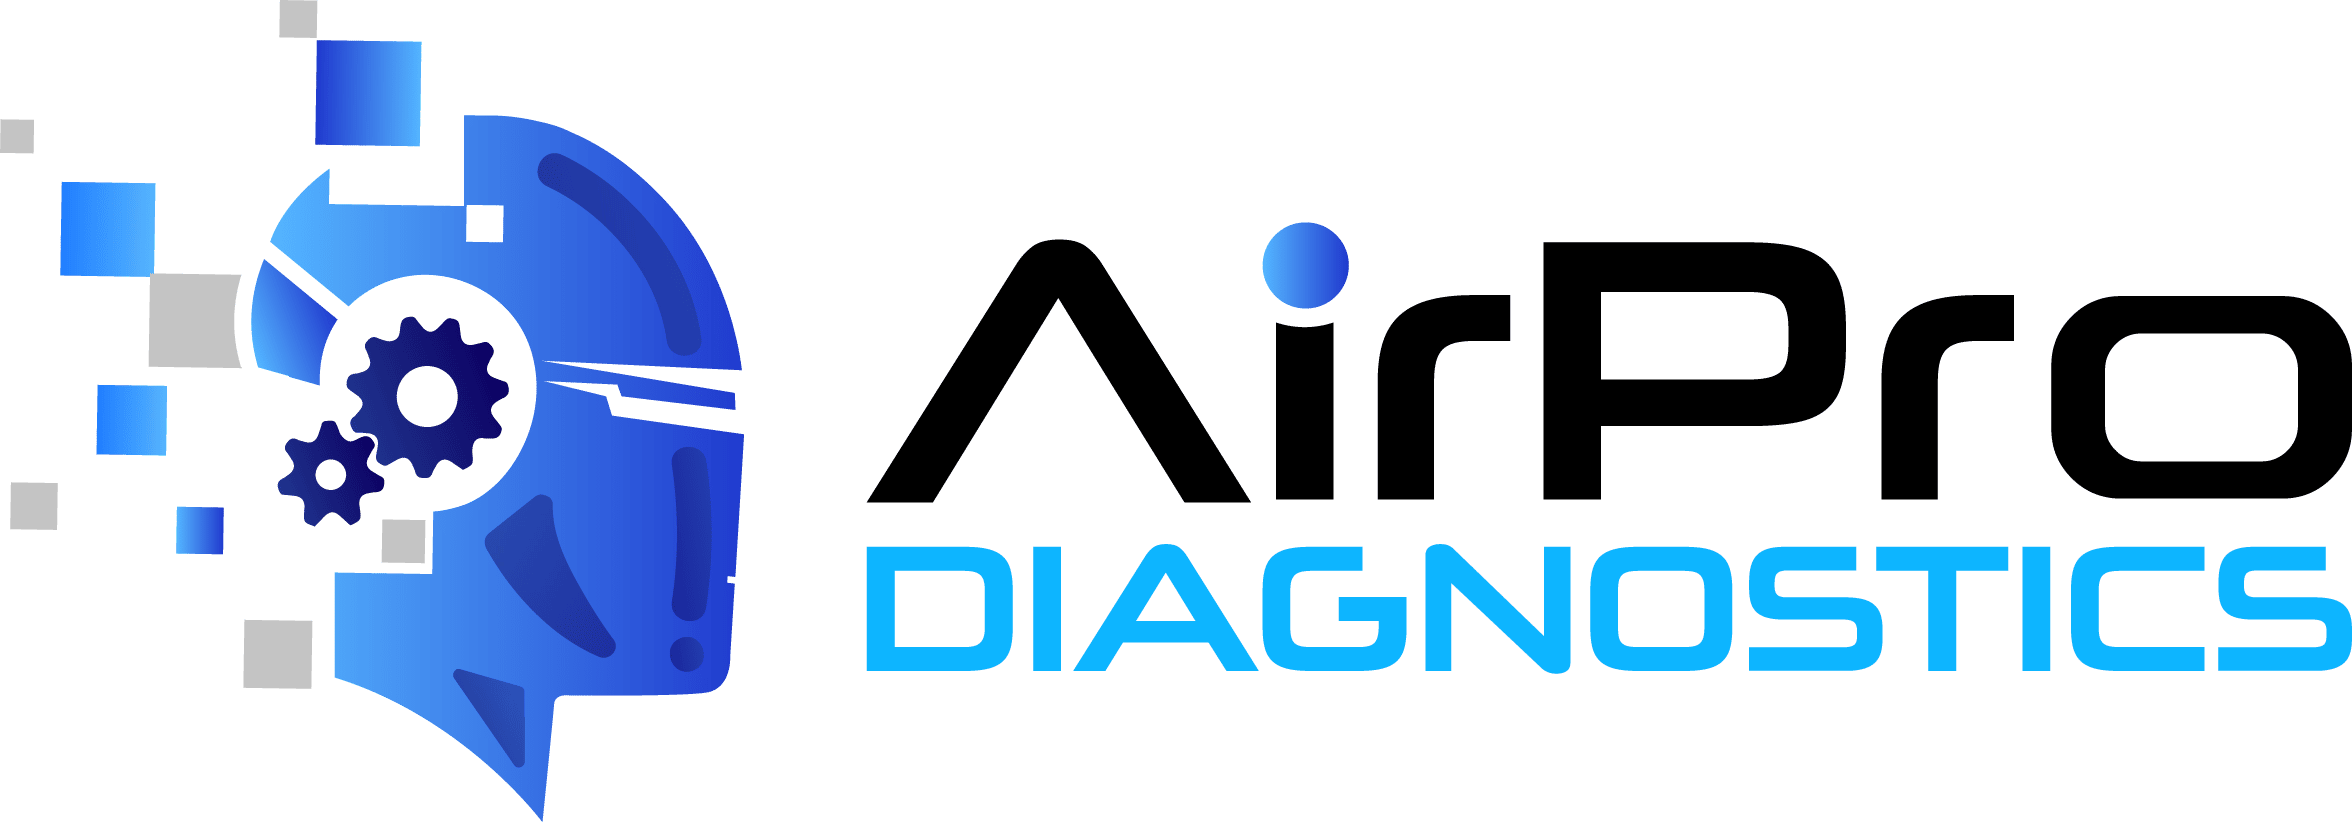 AirPro Diagnostics | Remote Diagnostics & ADAS Scanning | It is always difficult when you relocate and start a new position. | AirPro Diagnostics | Remote Diagnostics & ADAS Scanning